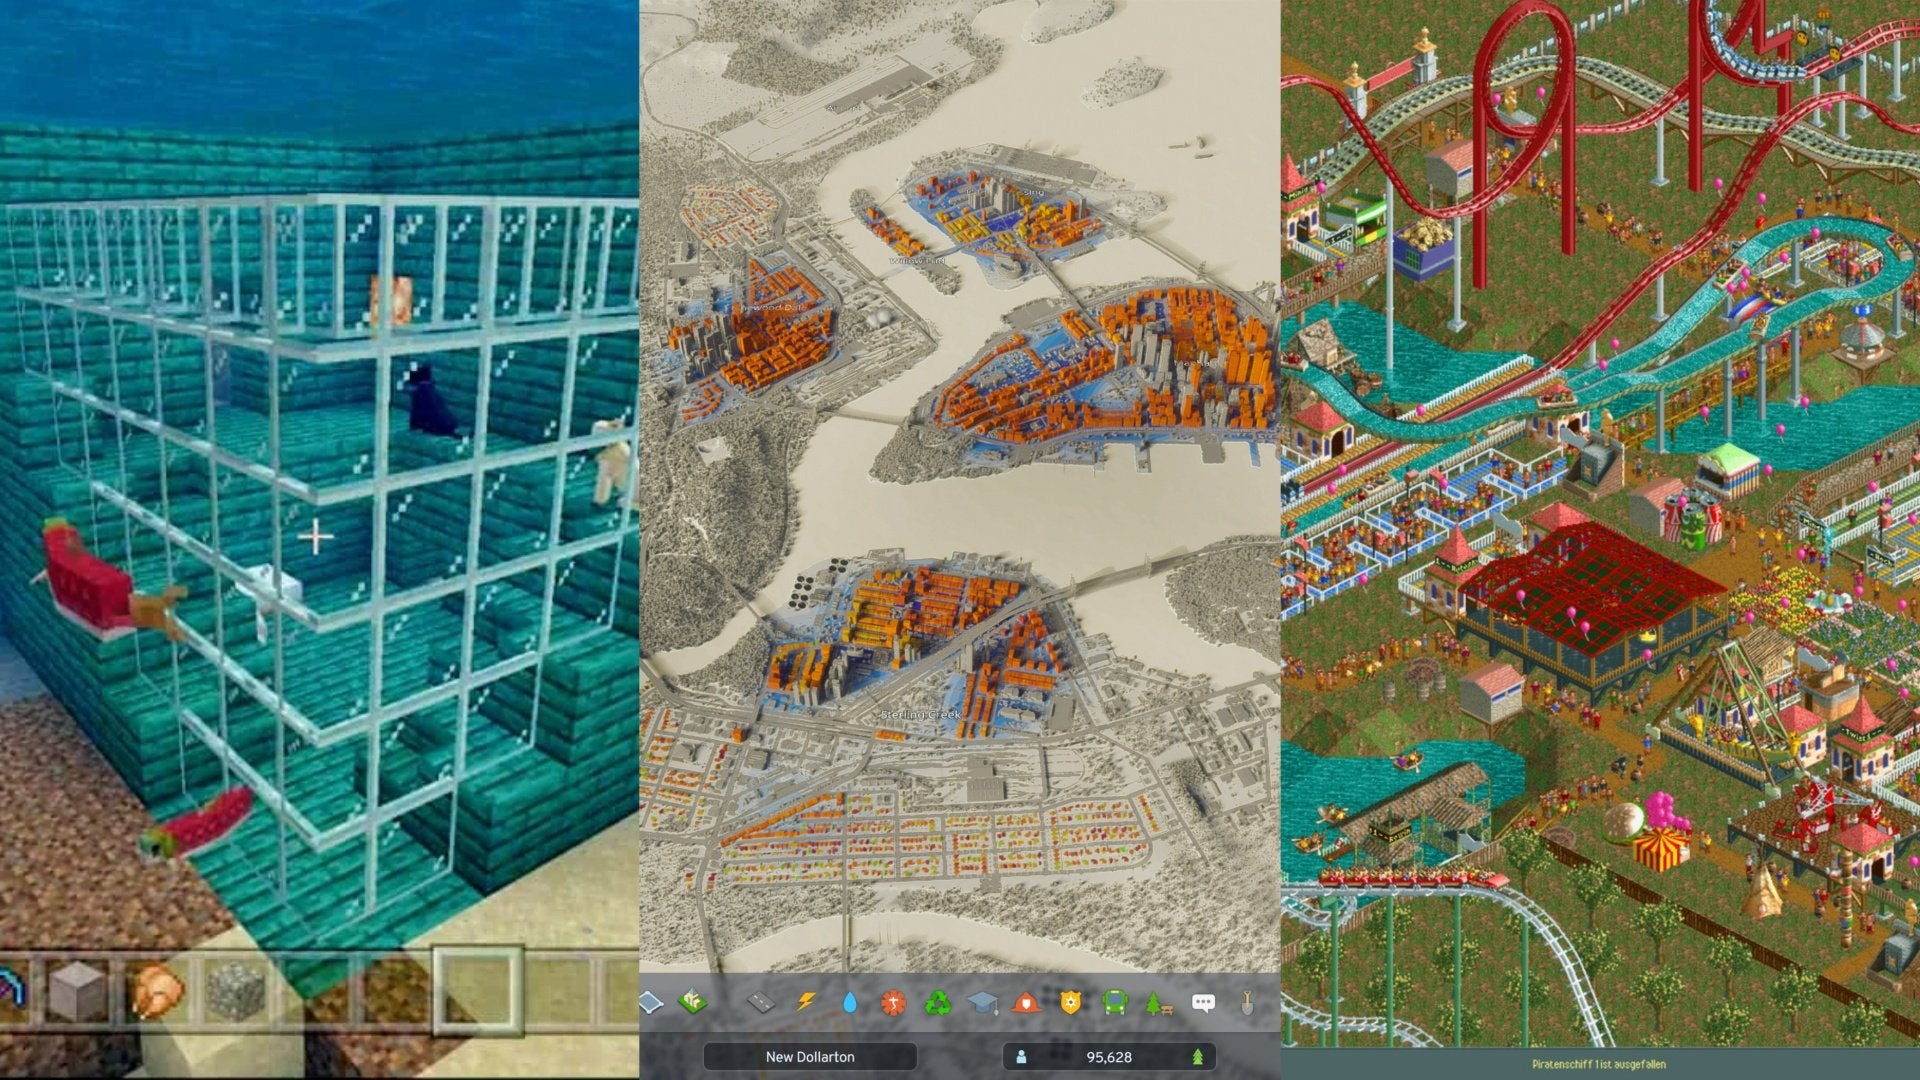 On the left is a player looking at an underwater house in Minecraft, in the center is a player looking at the population stats of their city in Cities: Skylines 2, and on the right is a park with a few rides and attractions in Roller Coaster Tycoon 2.